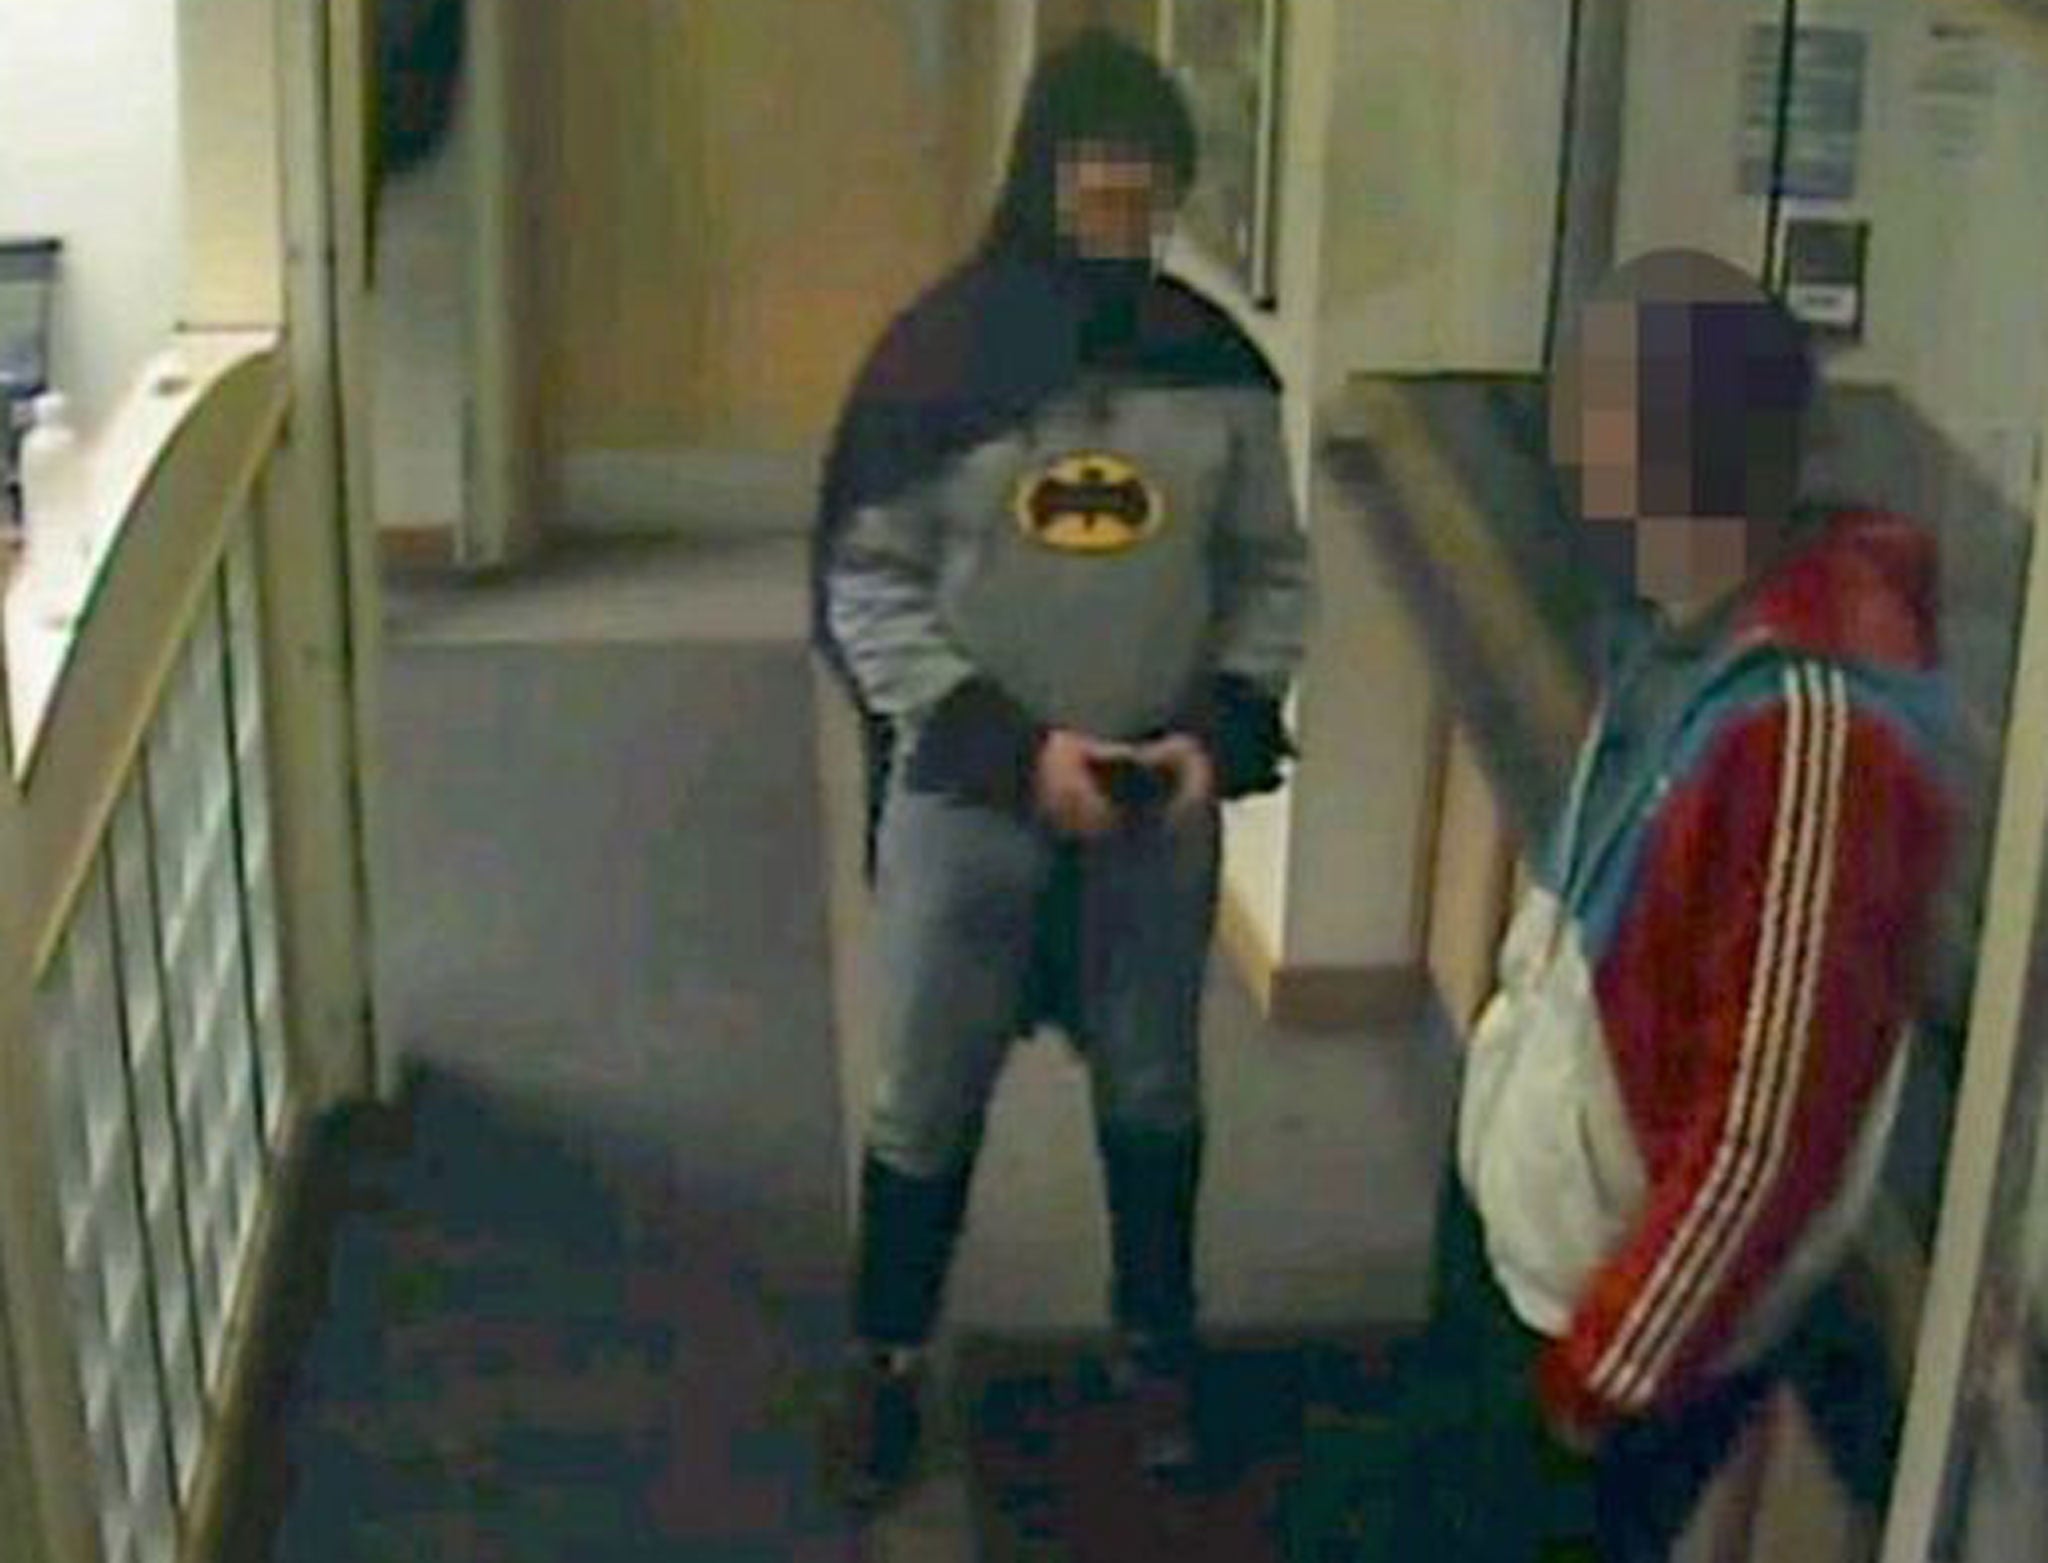 A man dressed as Batman marches a suspected fraudster to a police station in Bradford